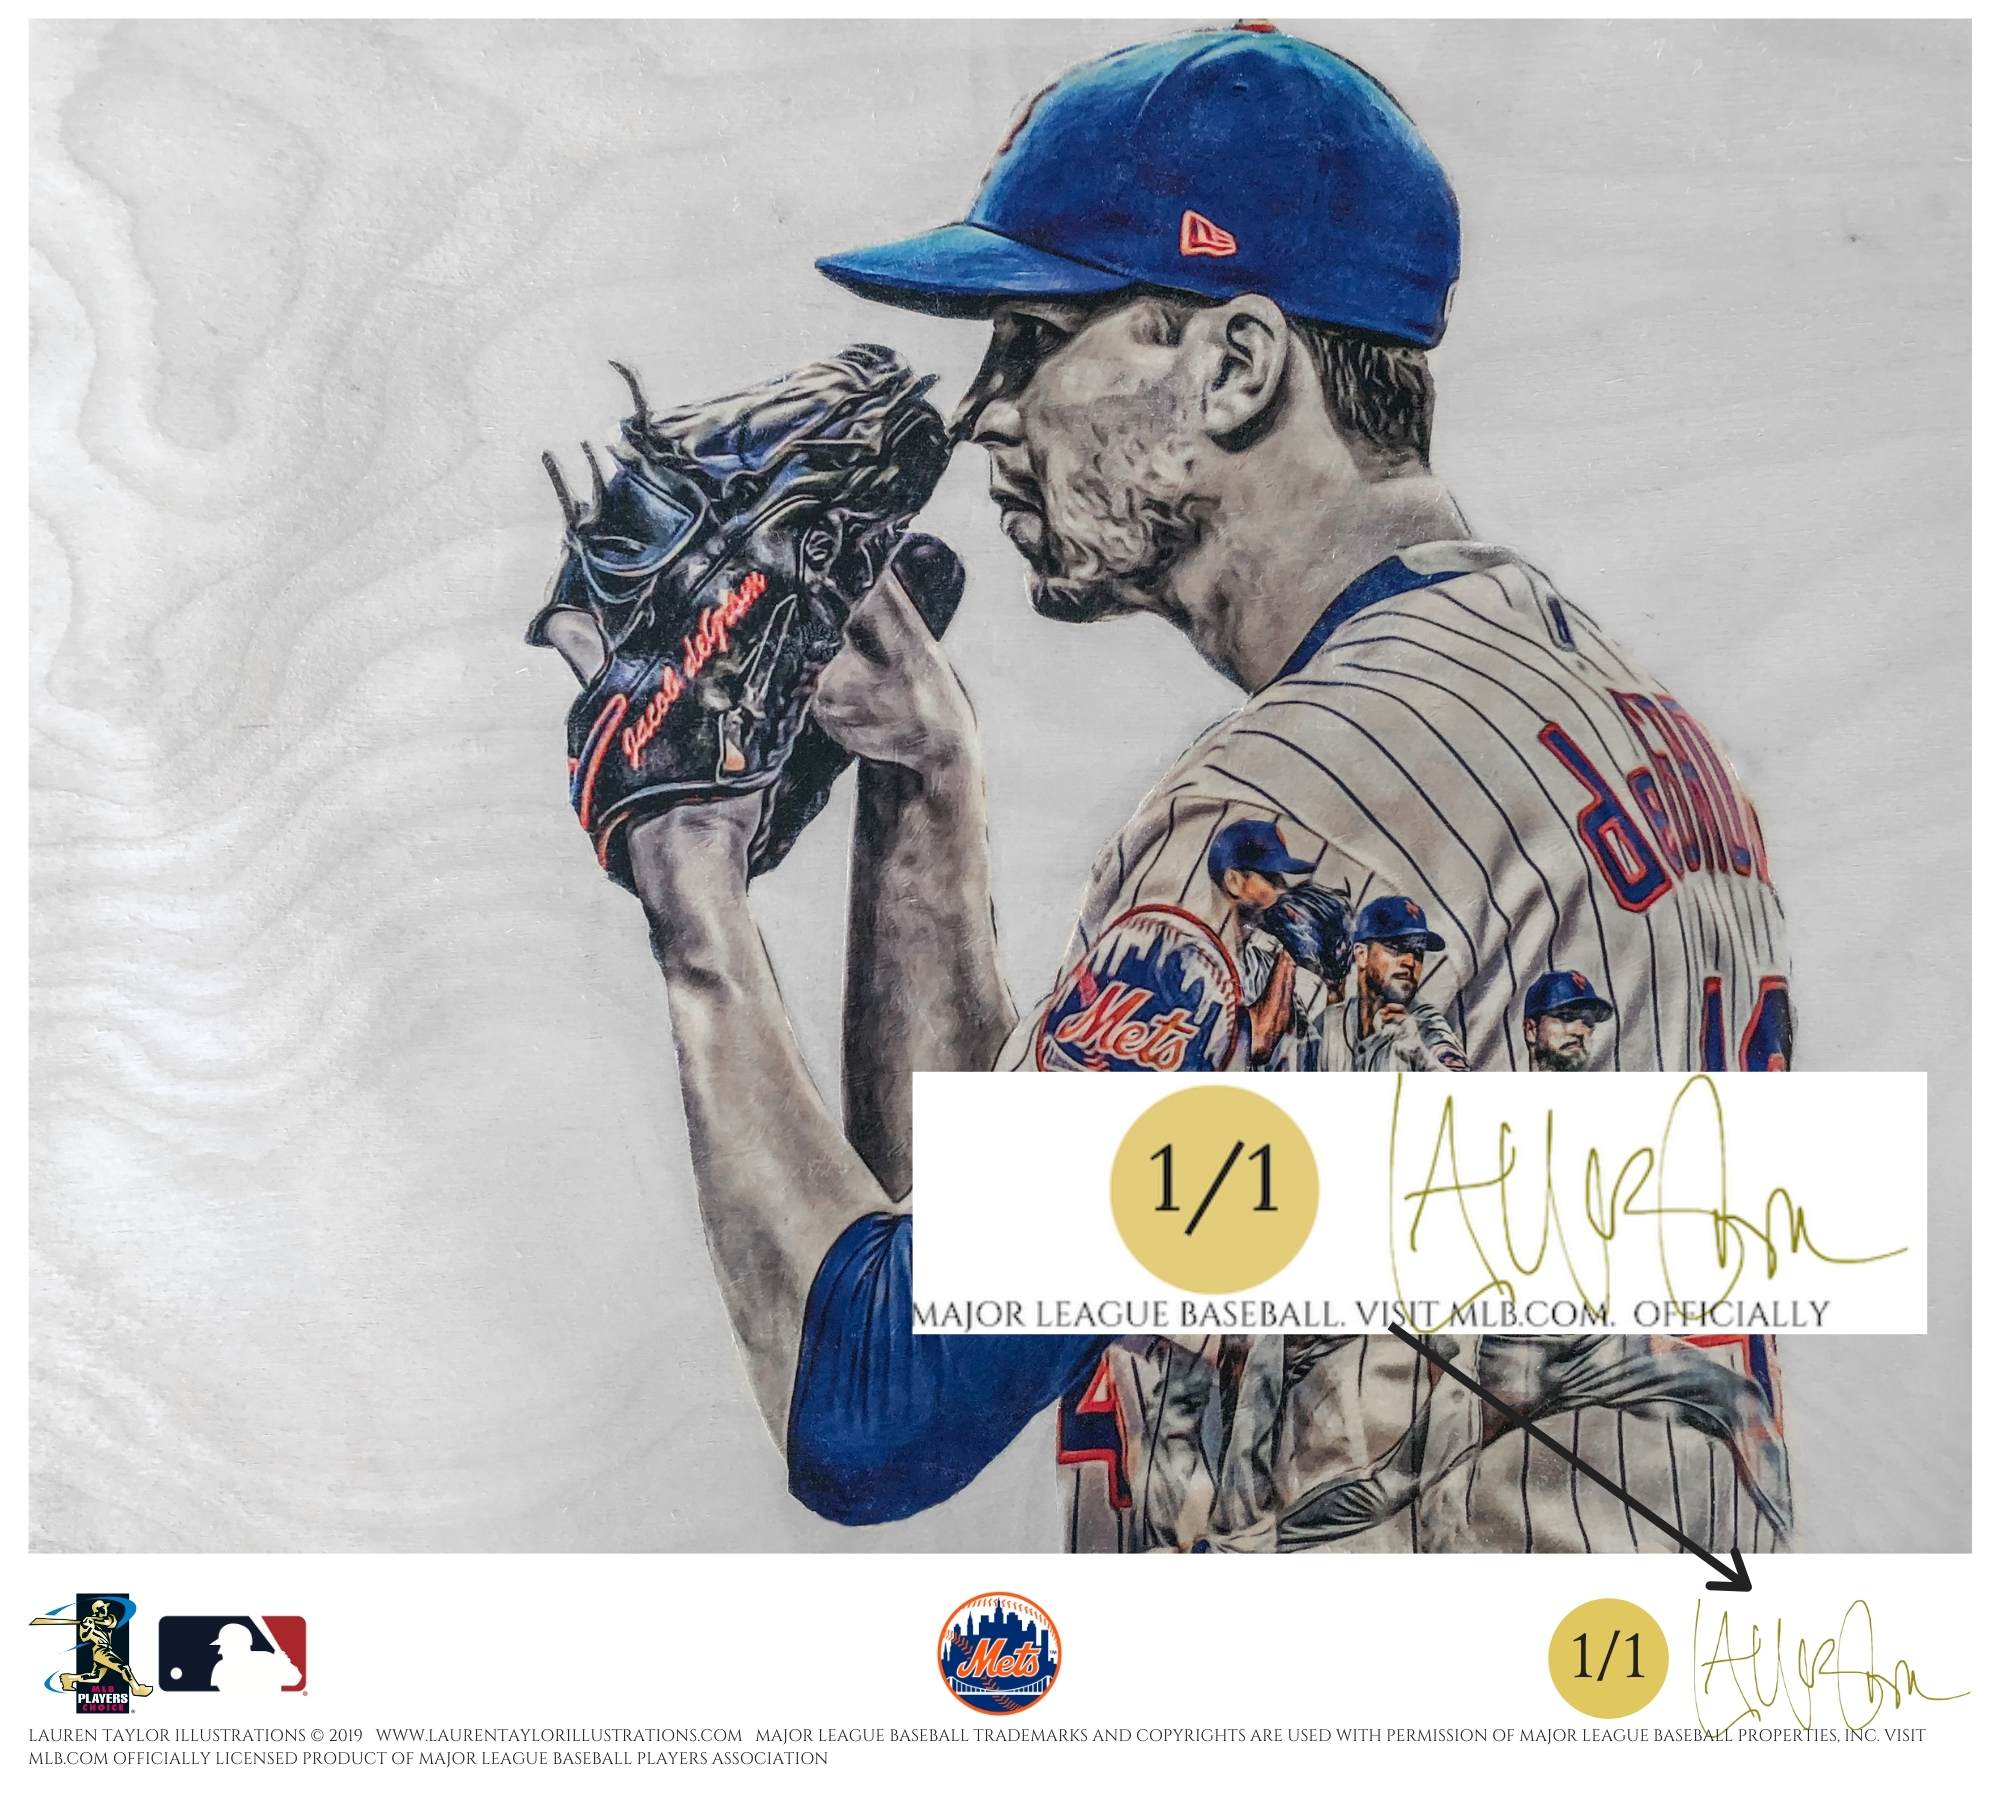 "deGrominator" (Jacob deGrom) New York Mets - Officially Licensed MLB Print - GOLD ARTIST SIGNATURE Limited Release /1